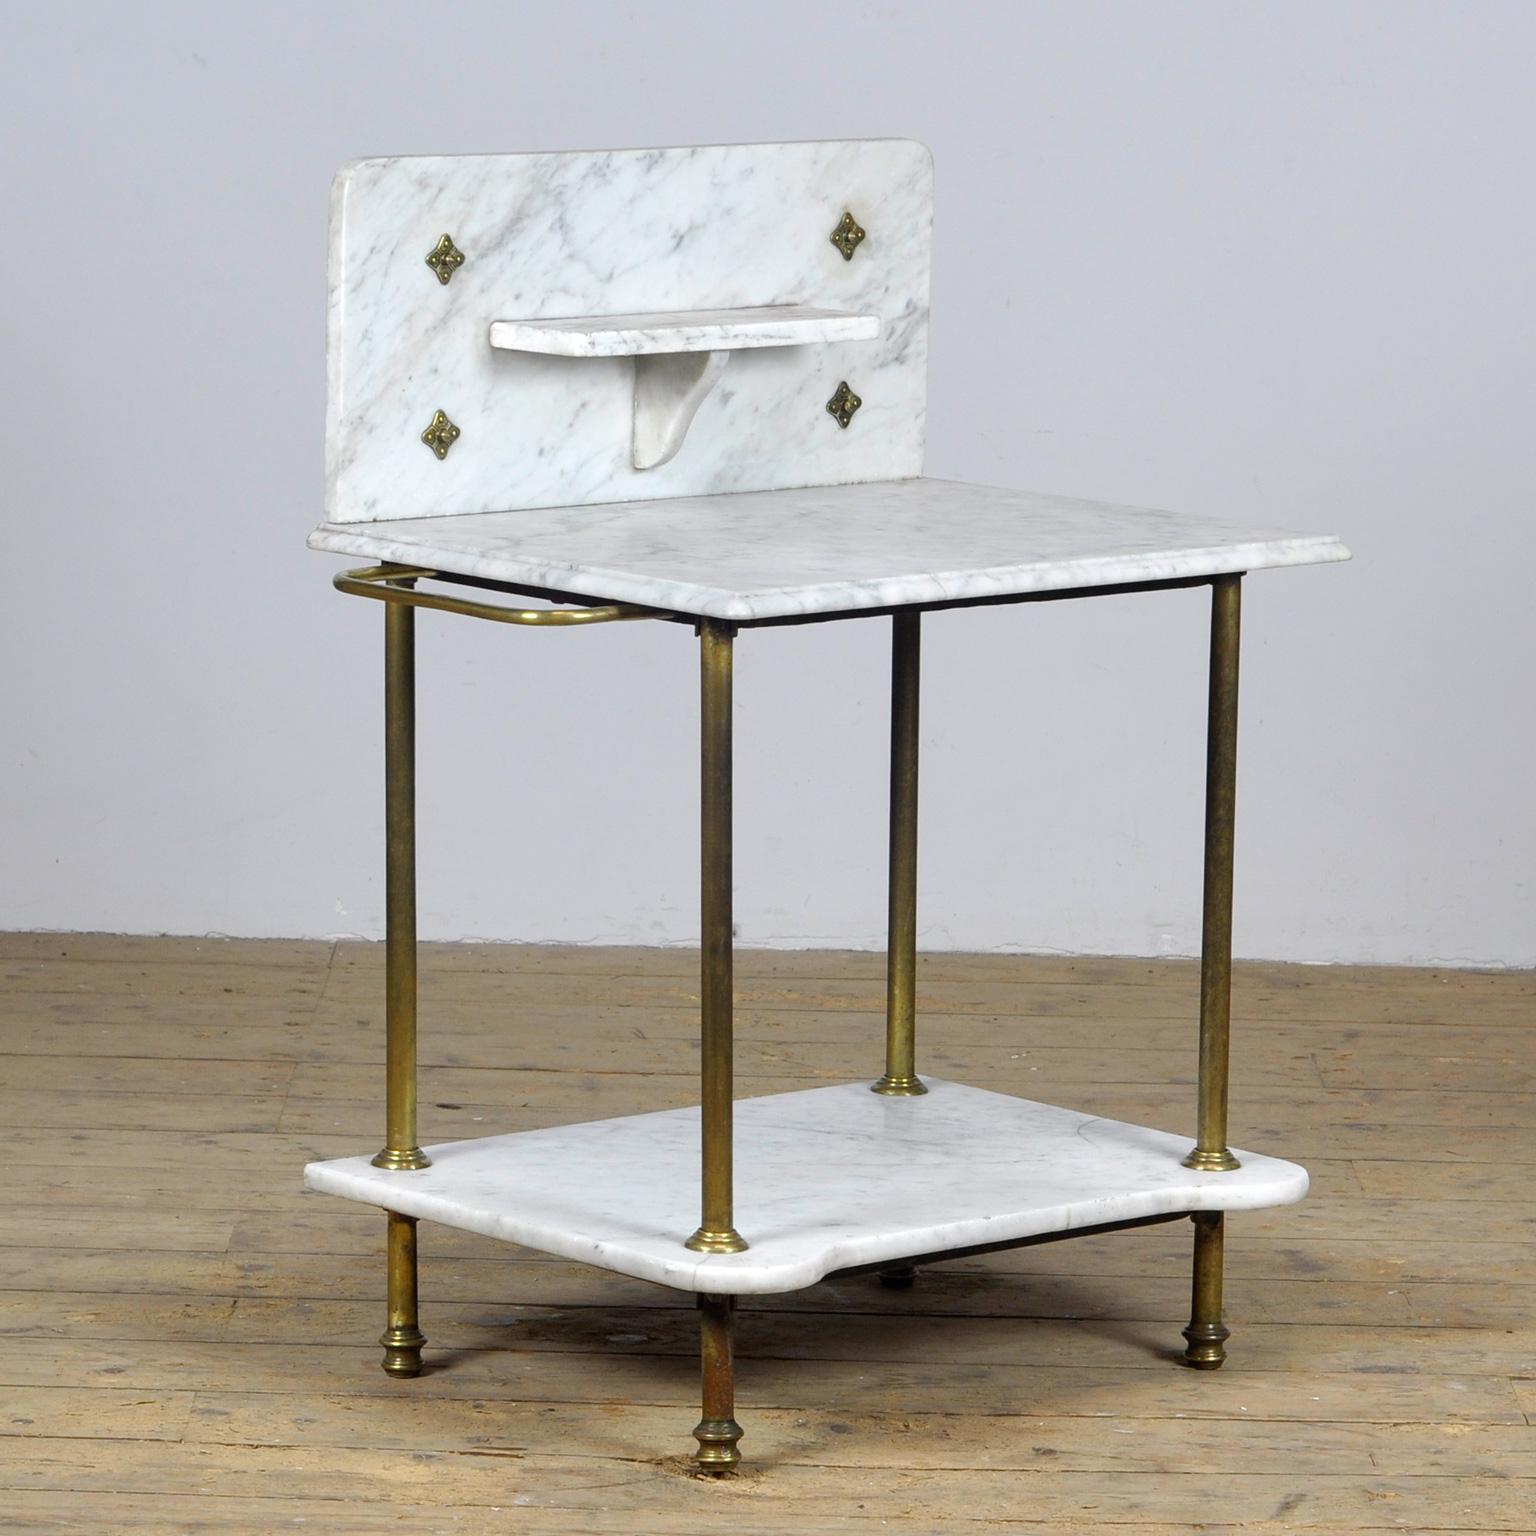 French Provincial Antique Wash Stand In Brass And Marble, Circa 1880 For Sale